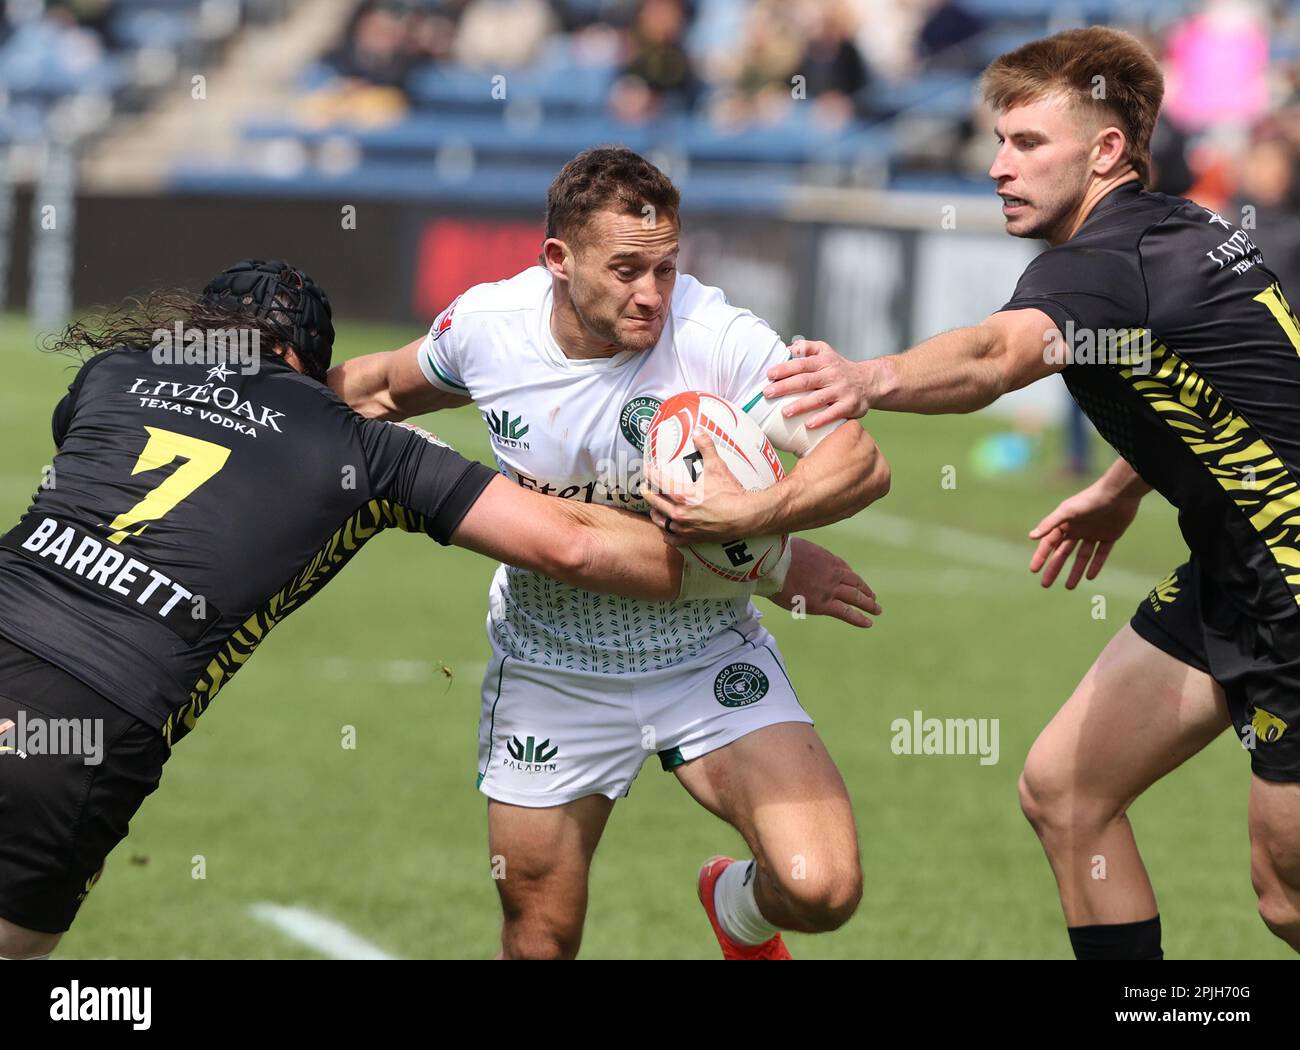 Chicago, USA, 2 April 2022. Major League Rugby (MLR) action between the Chicago Hounda and Houston SaberCats at SeatGeek Stadium in Bridgeview, IL, USA. Credit: Tony Gadomski / All Sport Imaging / Alamy Live New Stock Photo